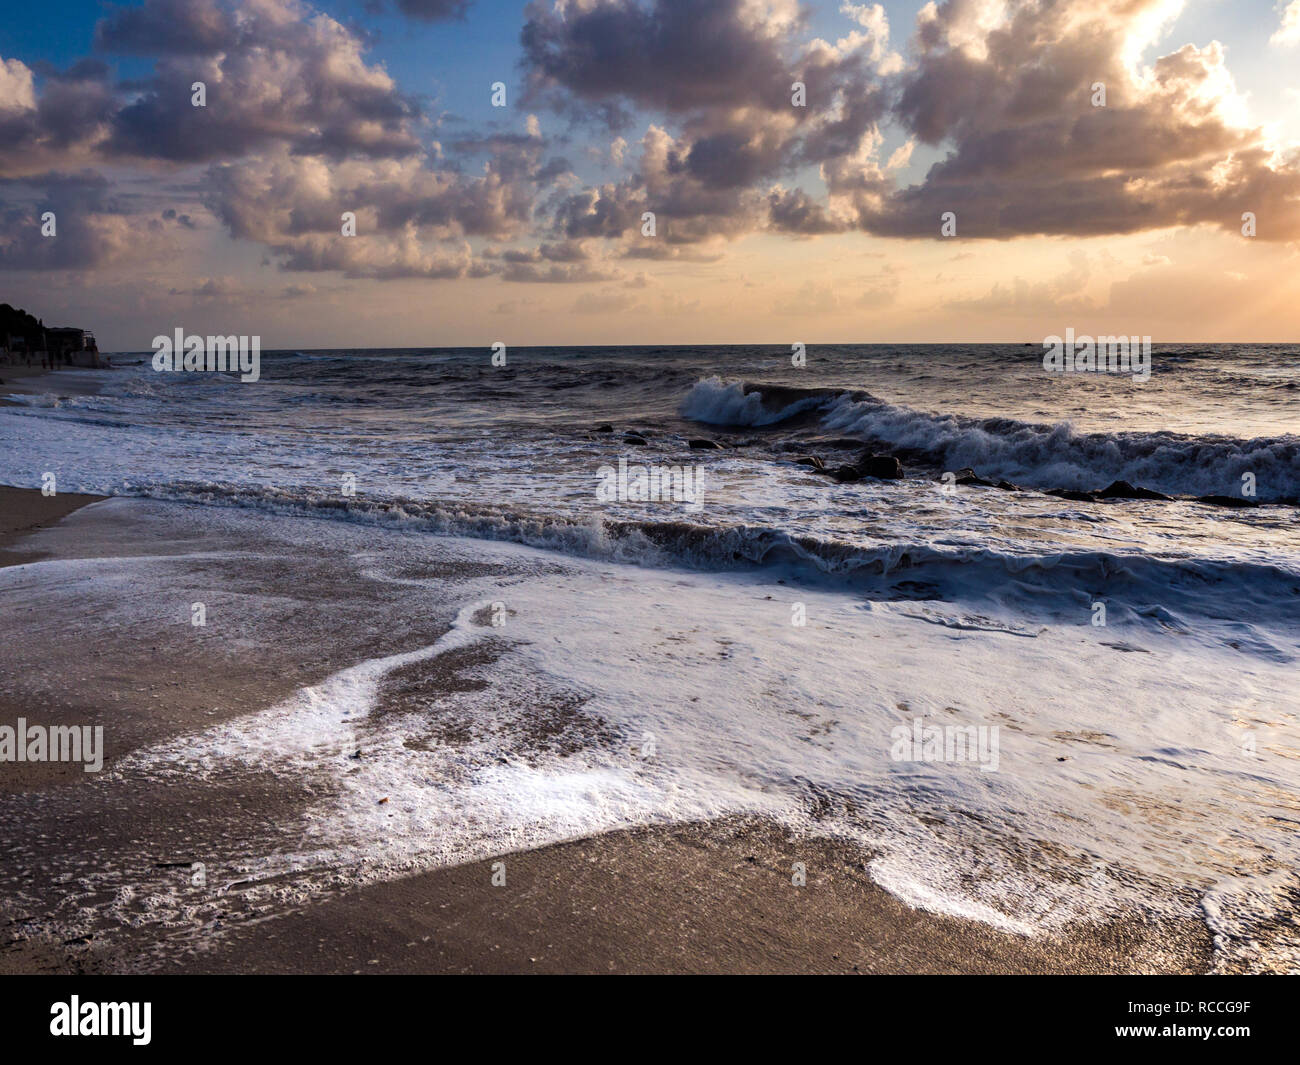 Sunset beach with rough seas and crashing waves. Stock Photo